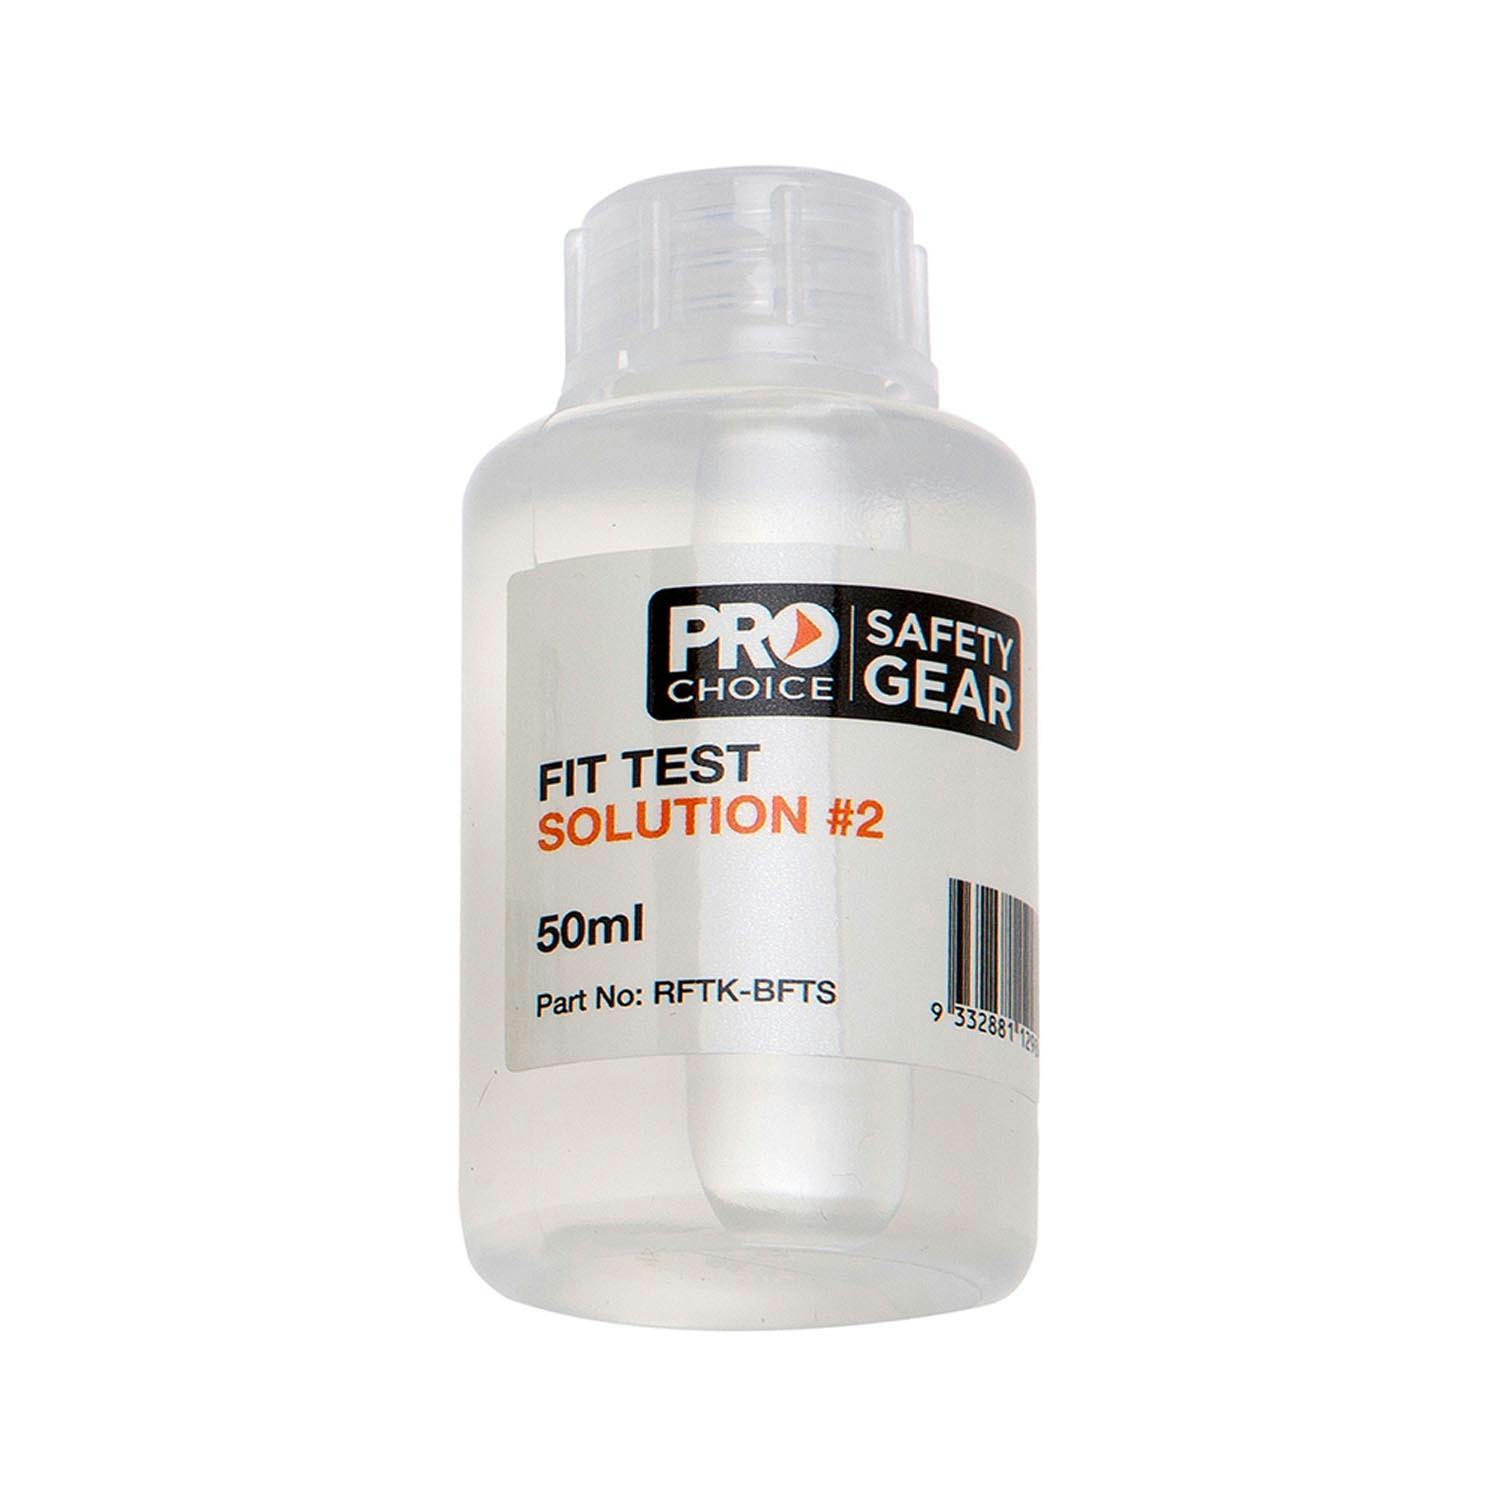 Pro Choice Pre-Mixed Bottle Fit Test Solution #2 For Qualitative Respiratory Fit Test Kit